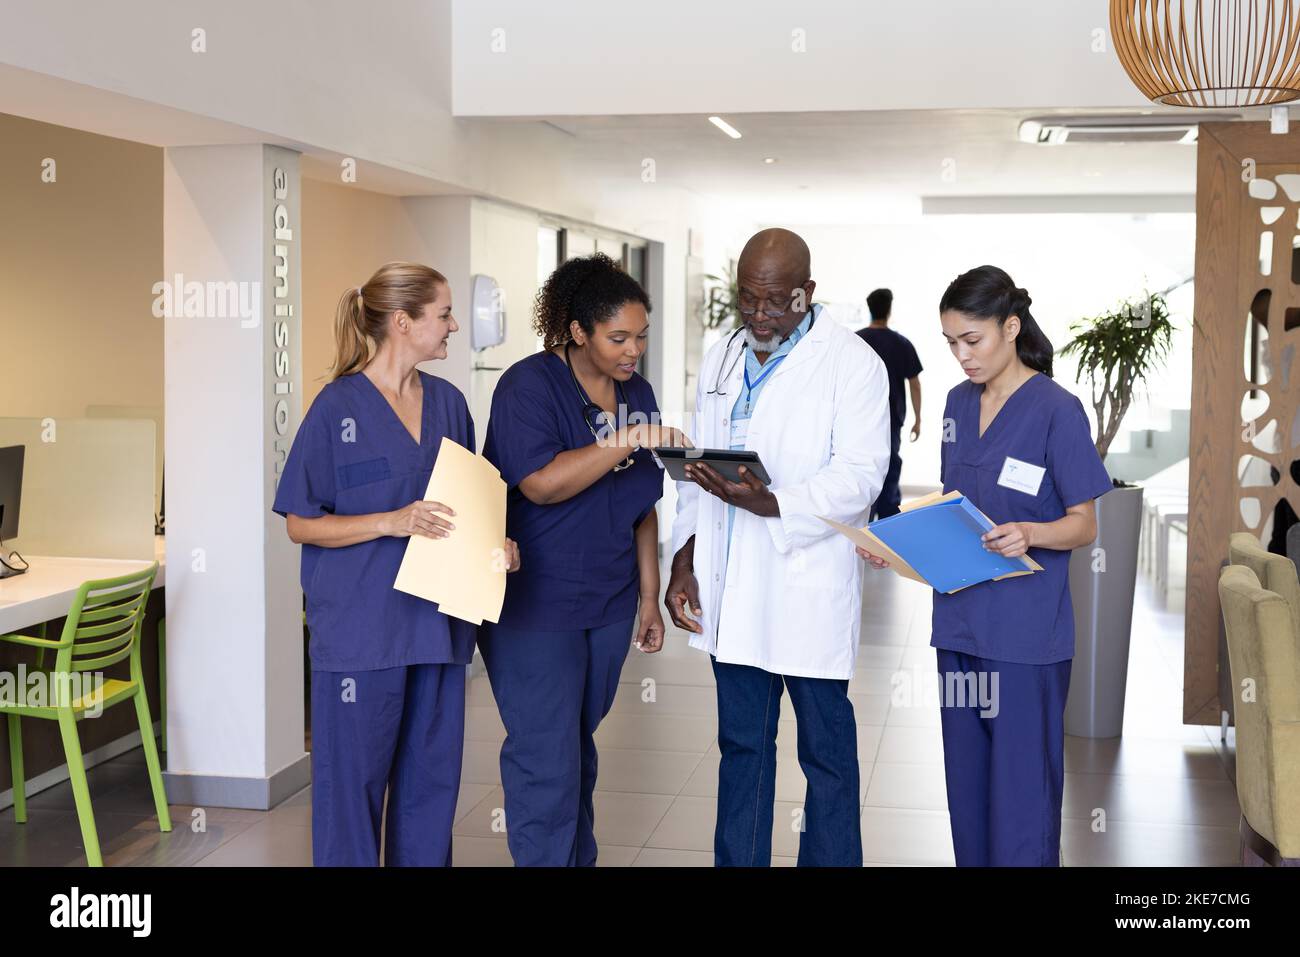 Diverse group of healthcare workers with tablet and paperwork discussing in hospital corridor Stock Photo